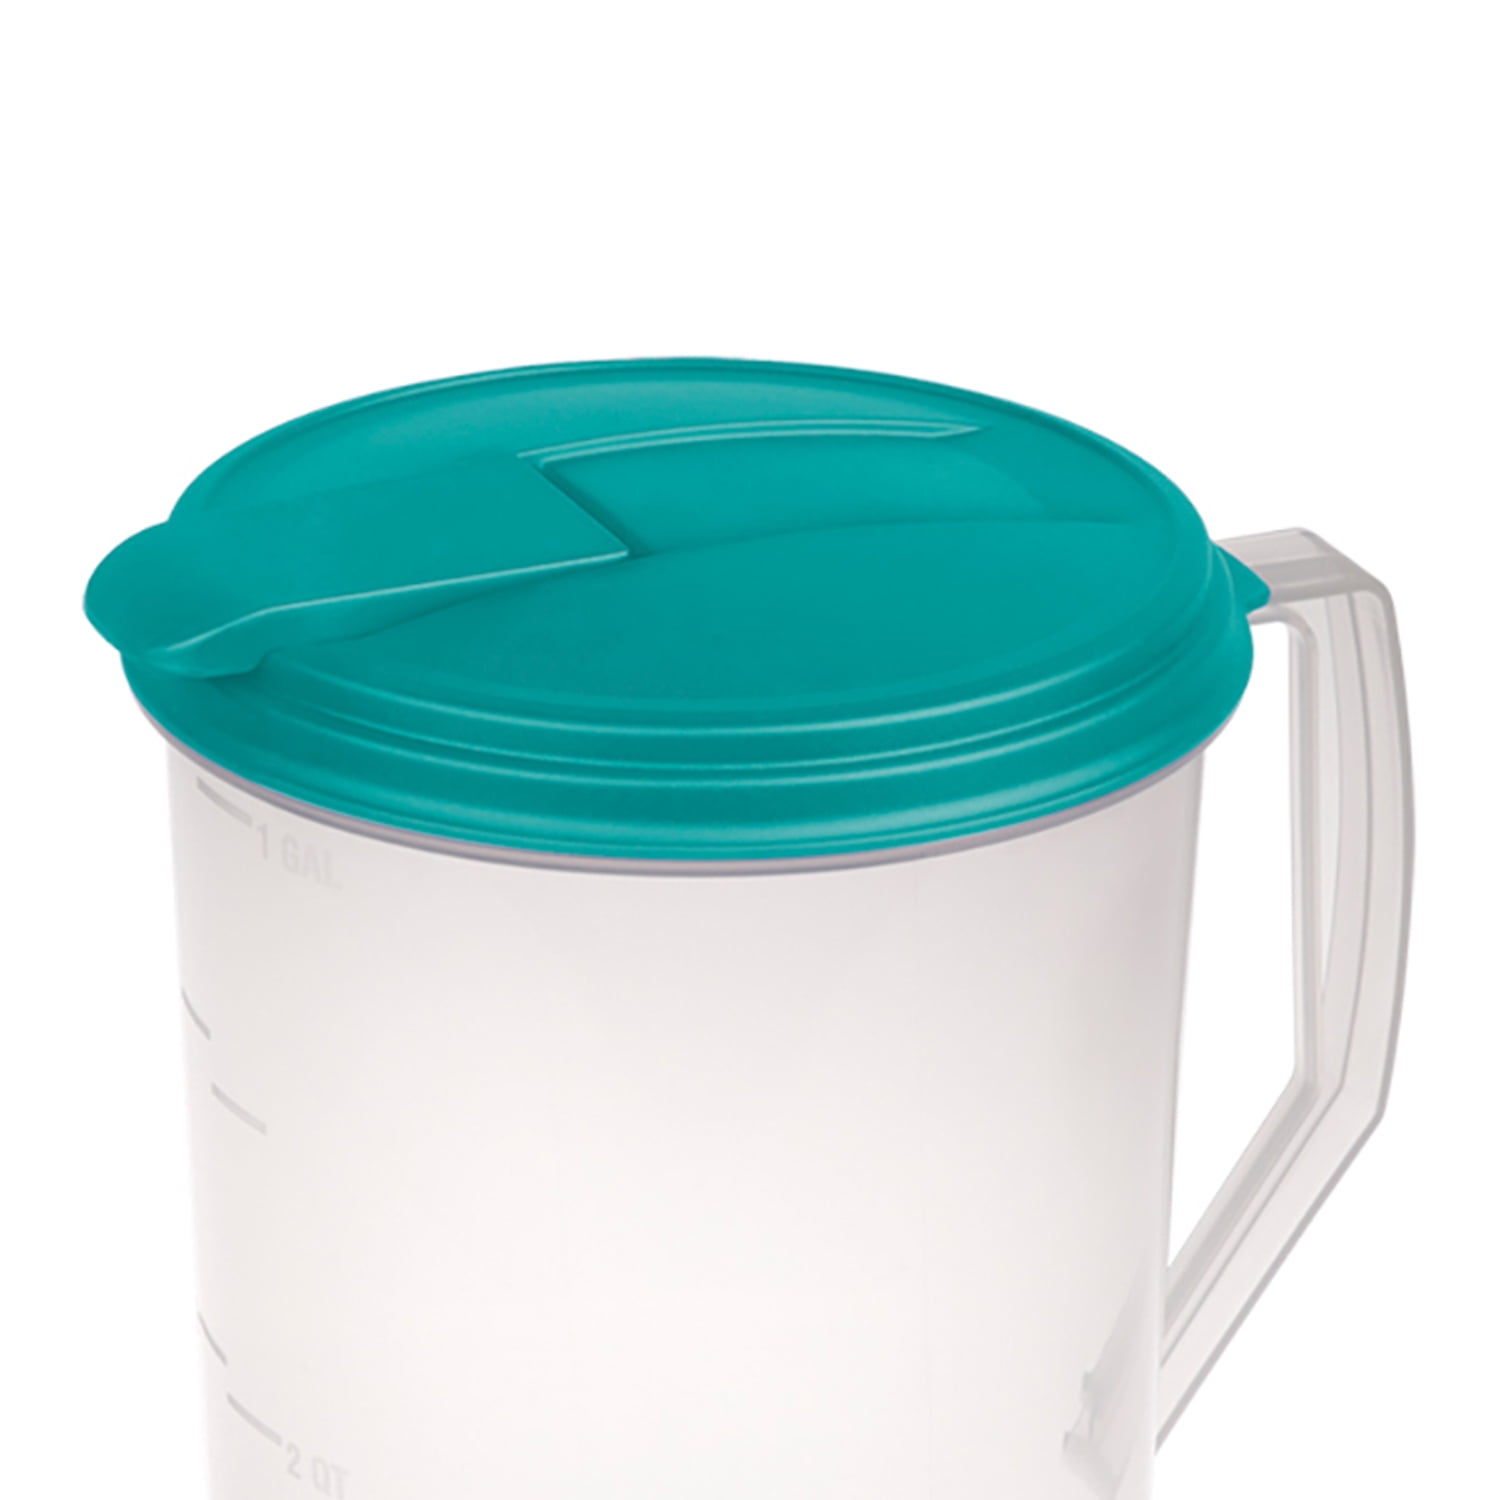 Realhomelove 0.25 Gallon/ 1L Plastic Pitcher with Lid(with 4 Small